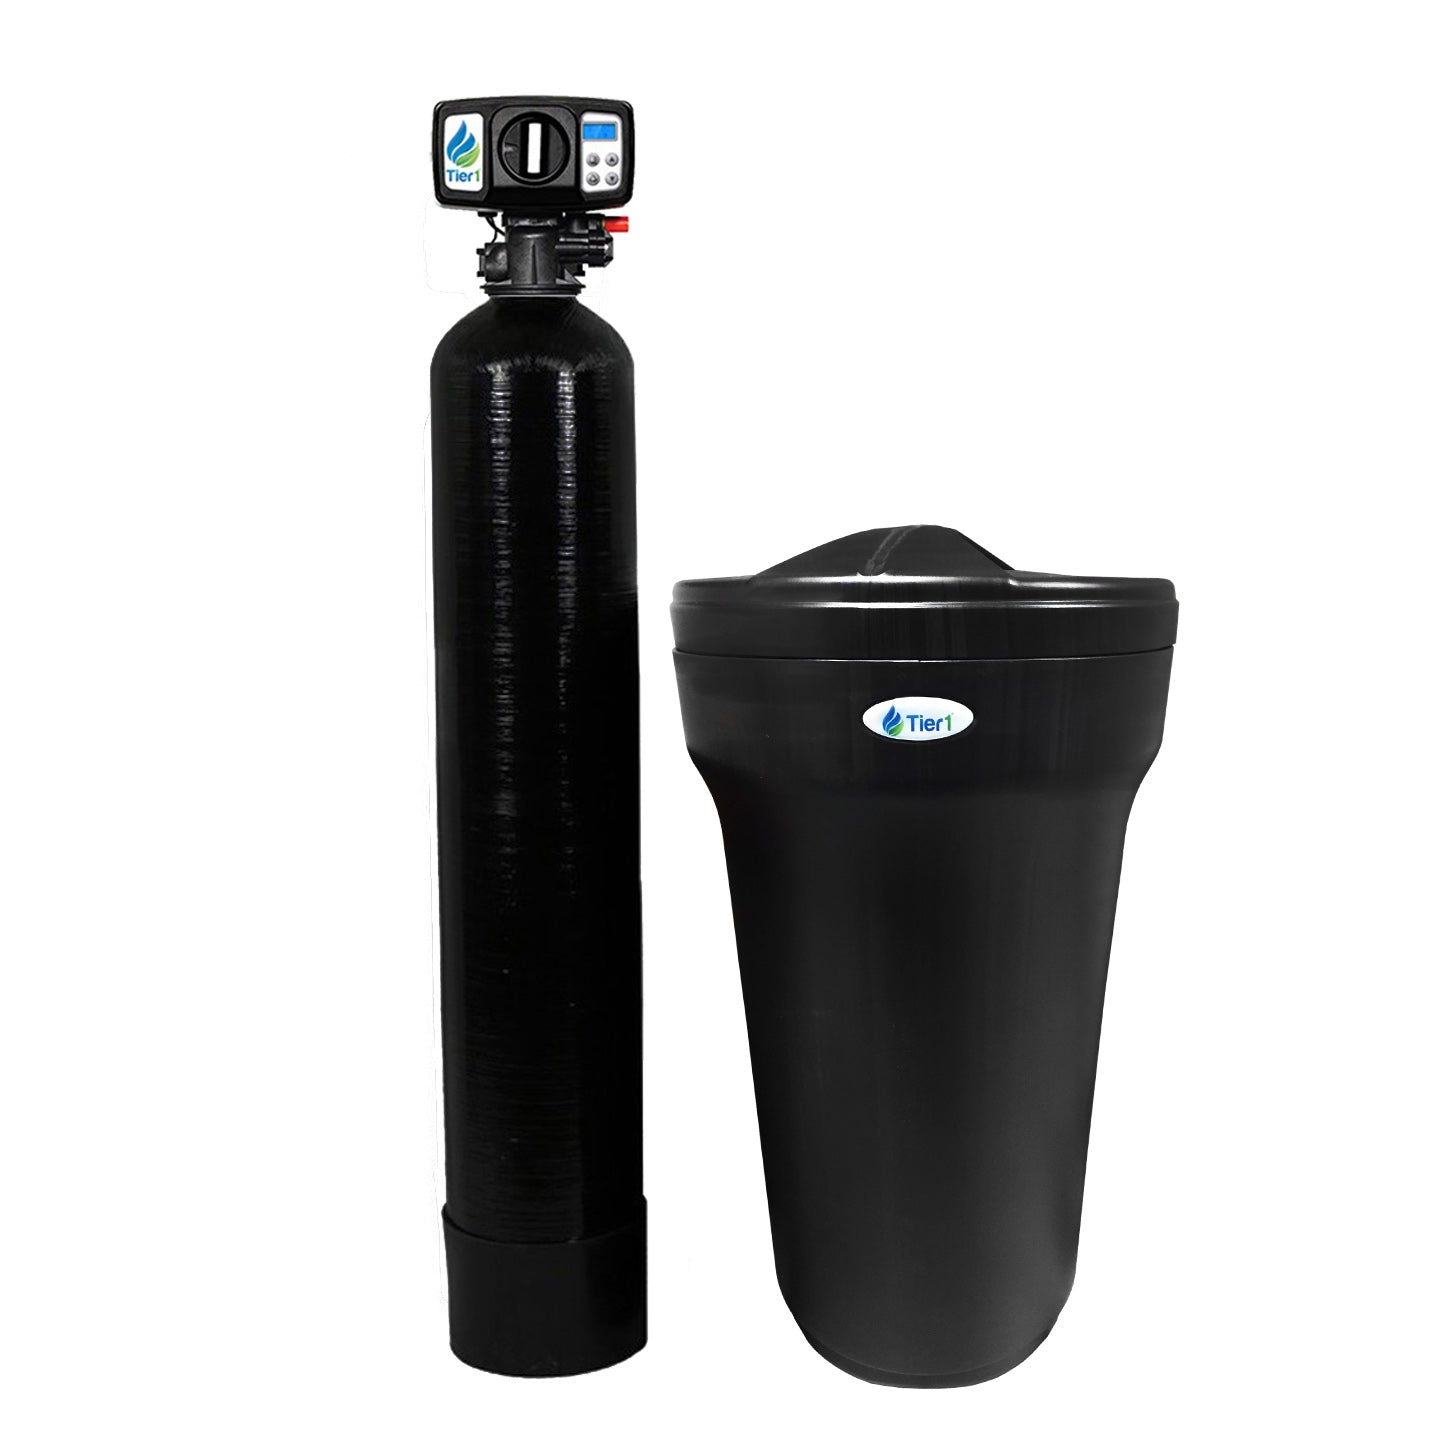 Precision Certified Series Tier1 30,000 Grain High Efficiency Digital Water Softening System for Hardness, Iron and Manganese Reduction